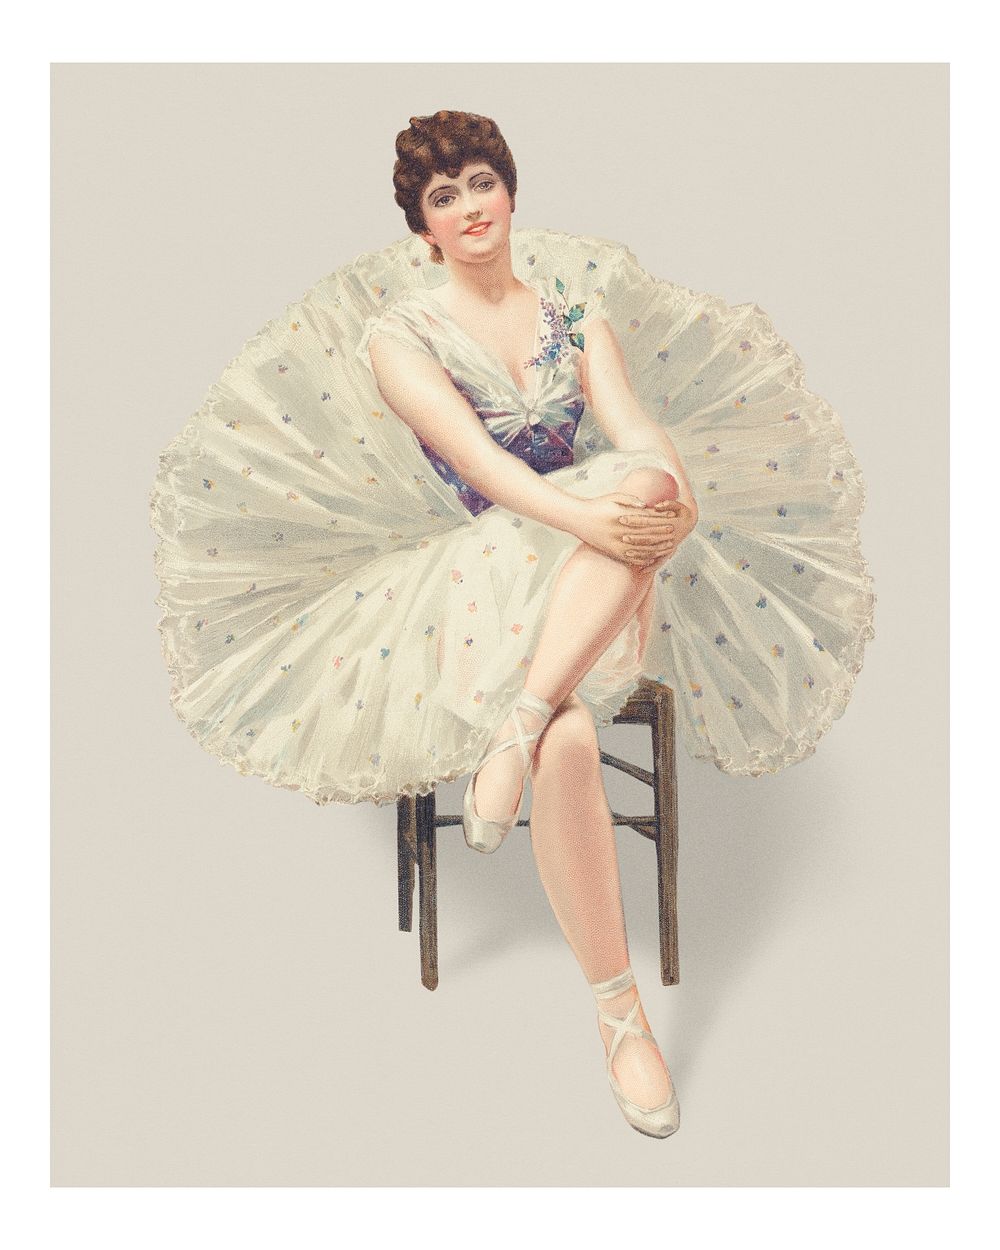 The belle of the ballet wall art print and poster, remix from the original artwork.